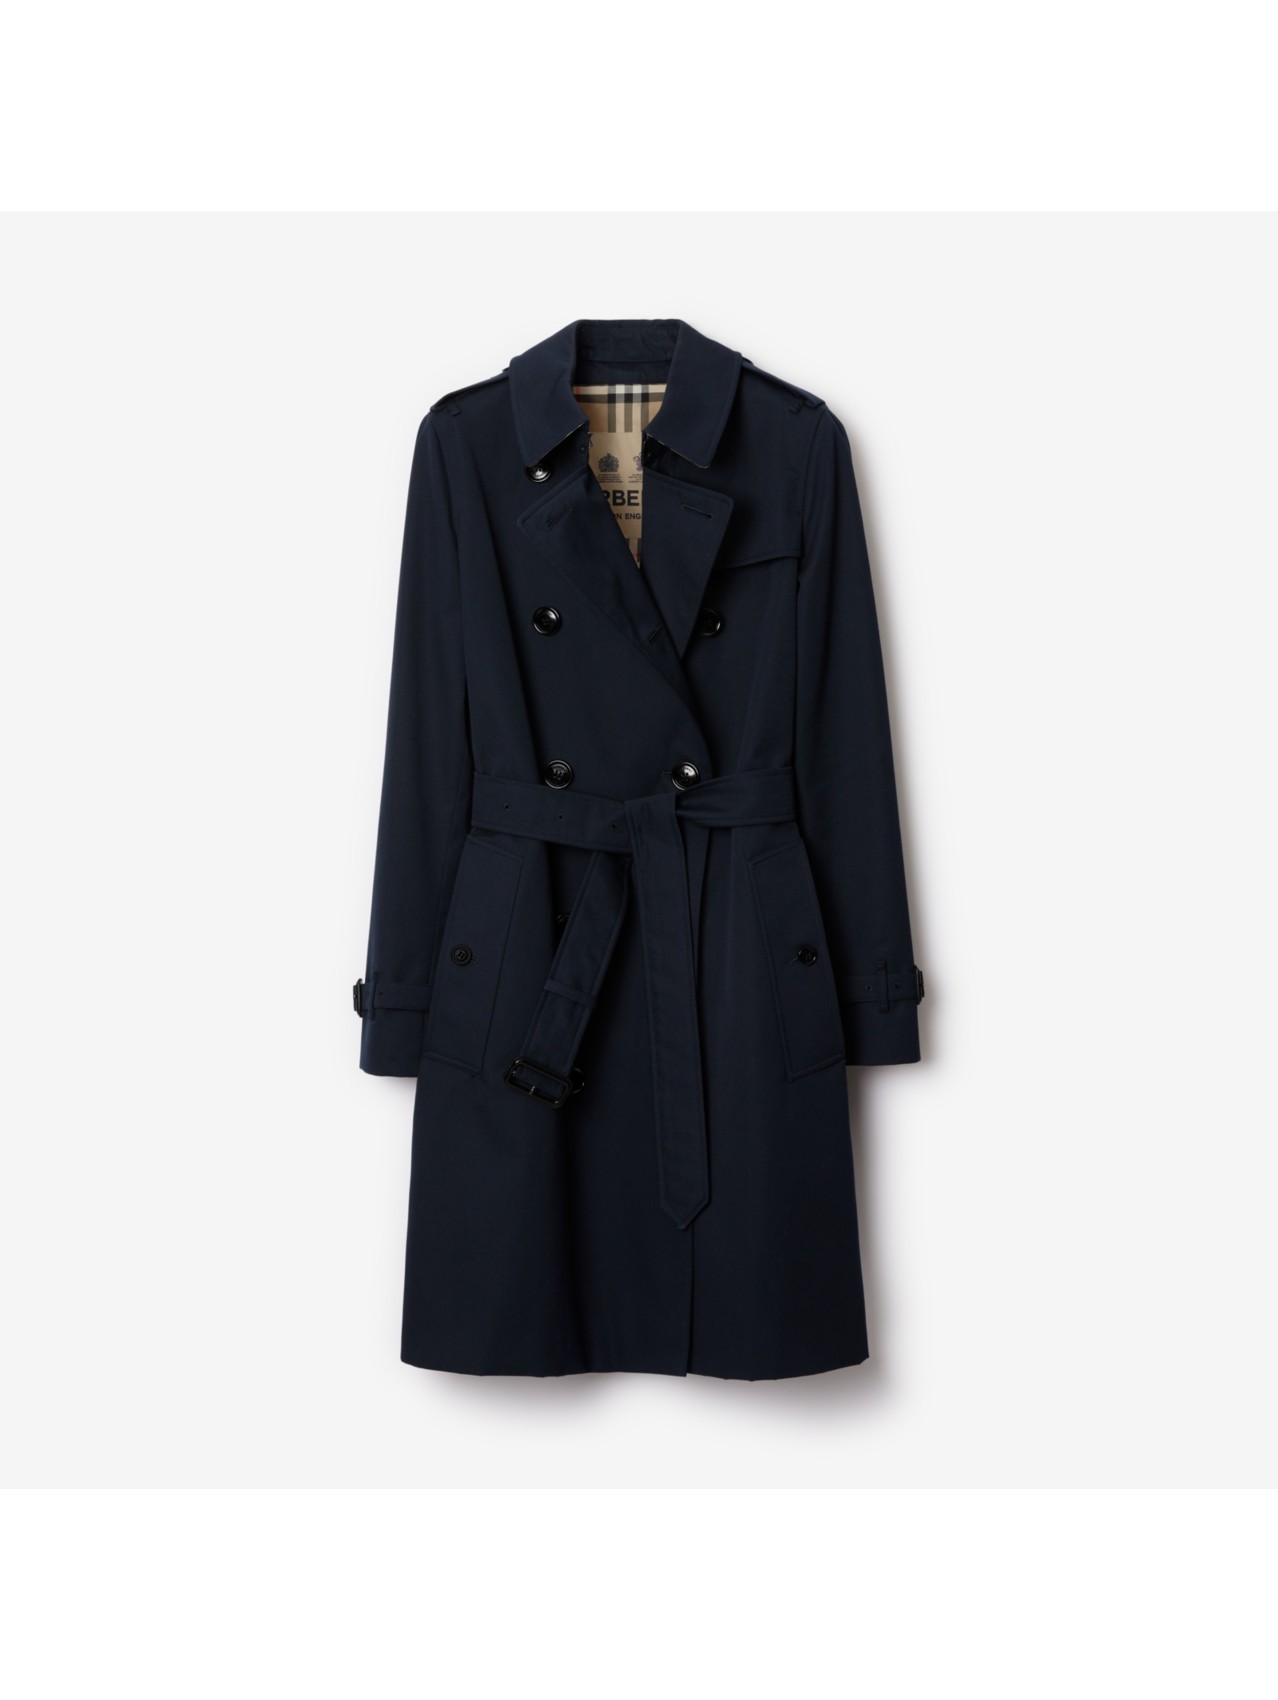 Mid-length Kensington Heritage Trench Coat in Black - Women | Burberry®  Official